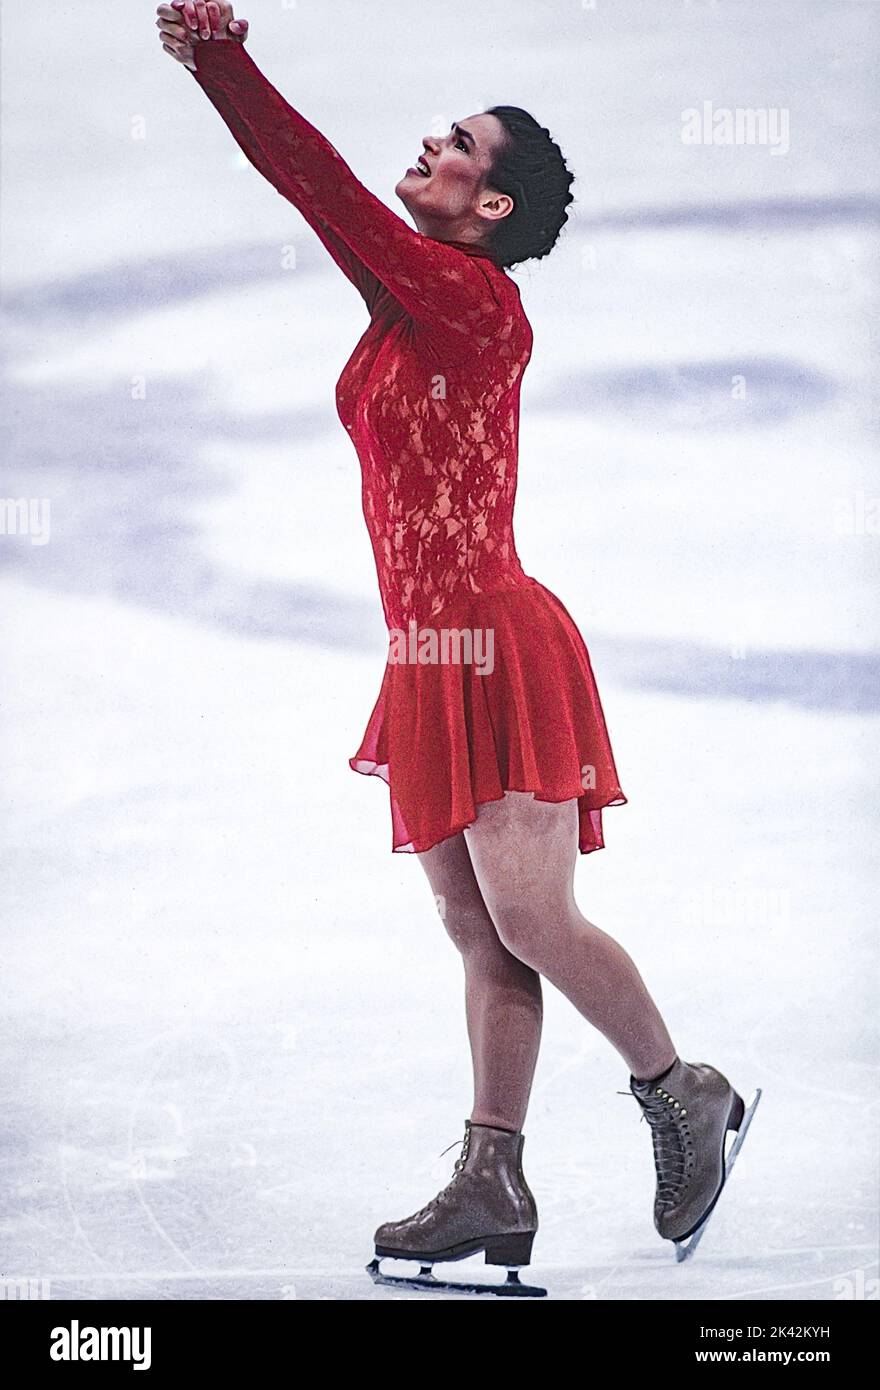 Katarina Witt (GER) competing in the Ladies Figure Skating Free Skate at the 1994 Olympic Winter Games. Stock Photo